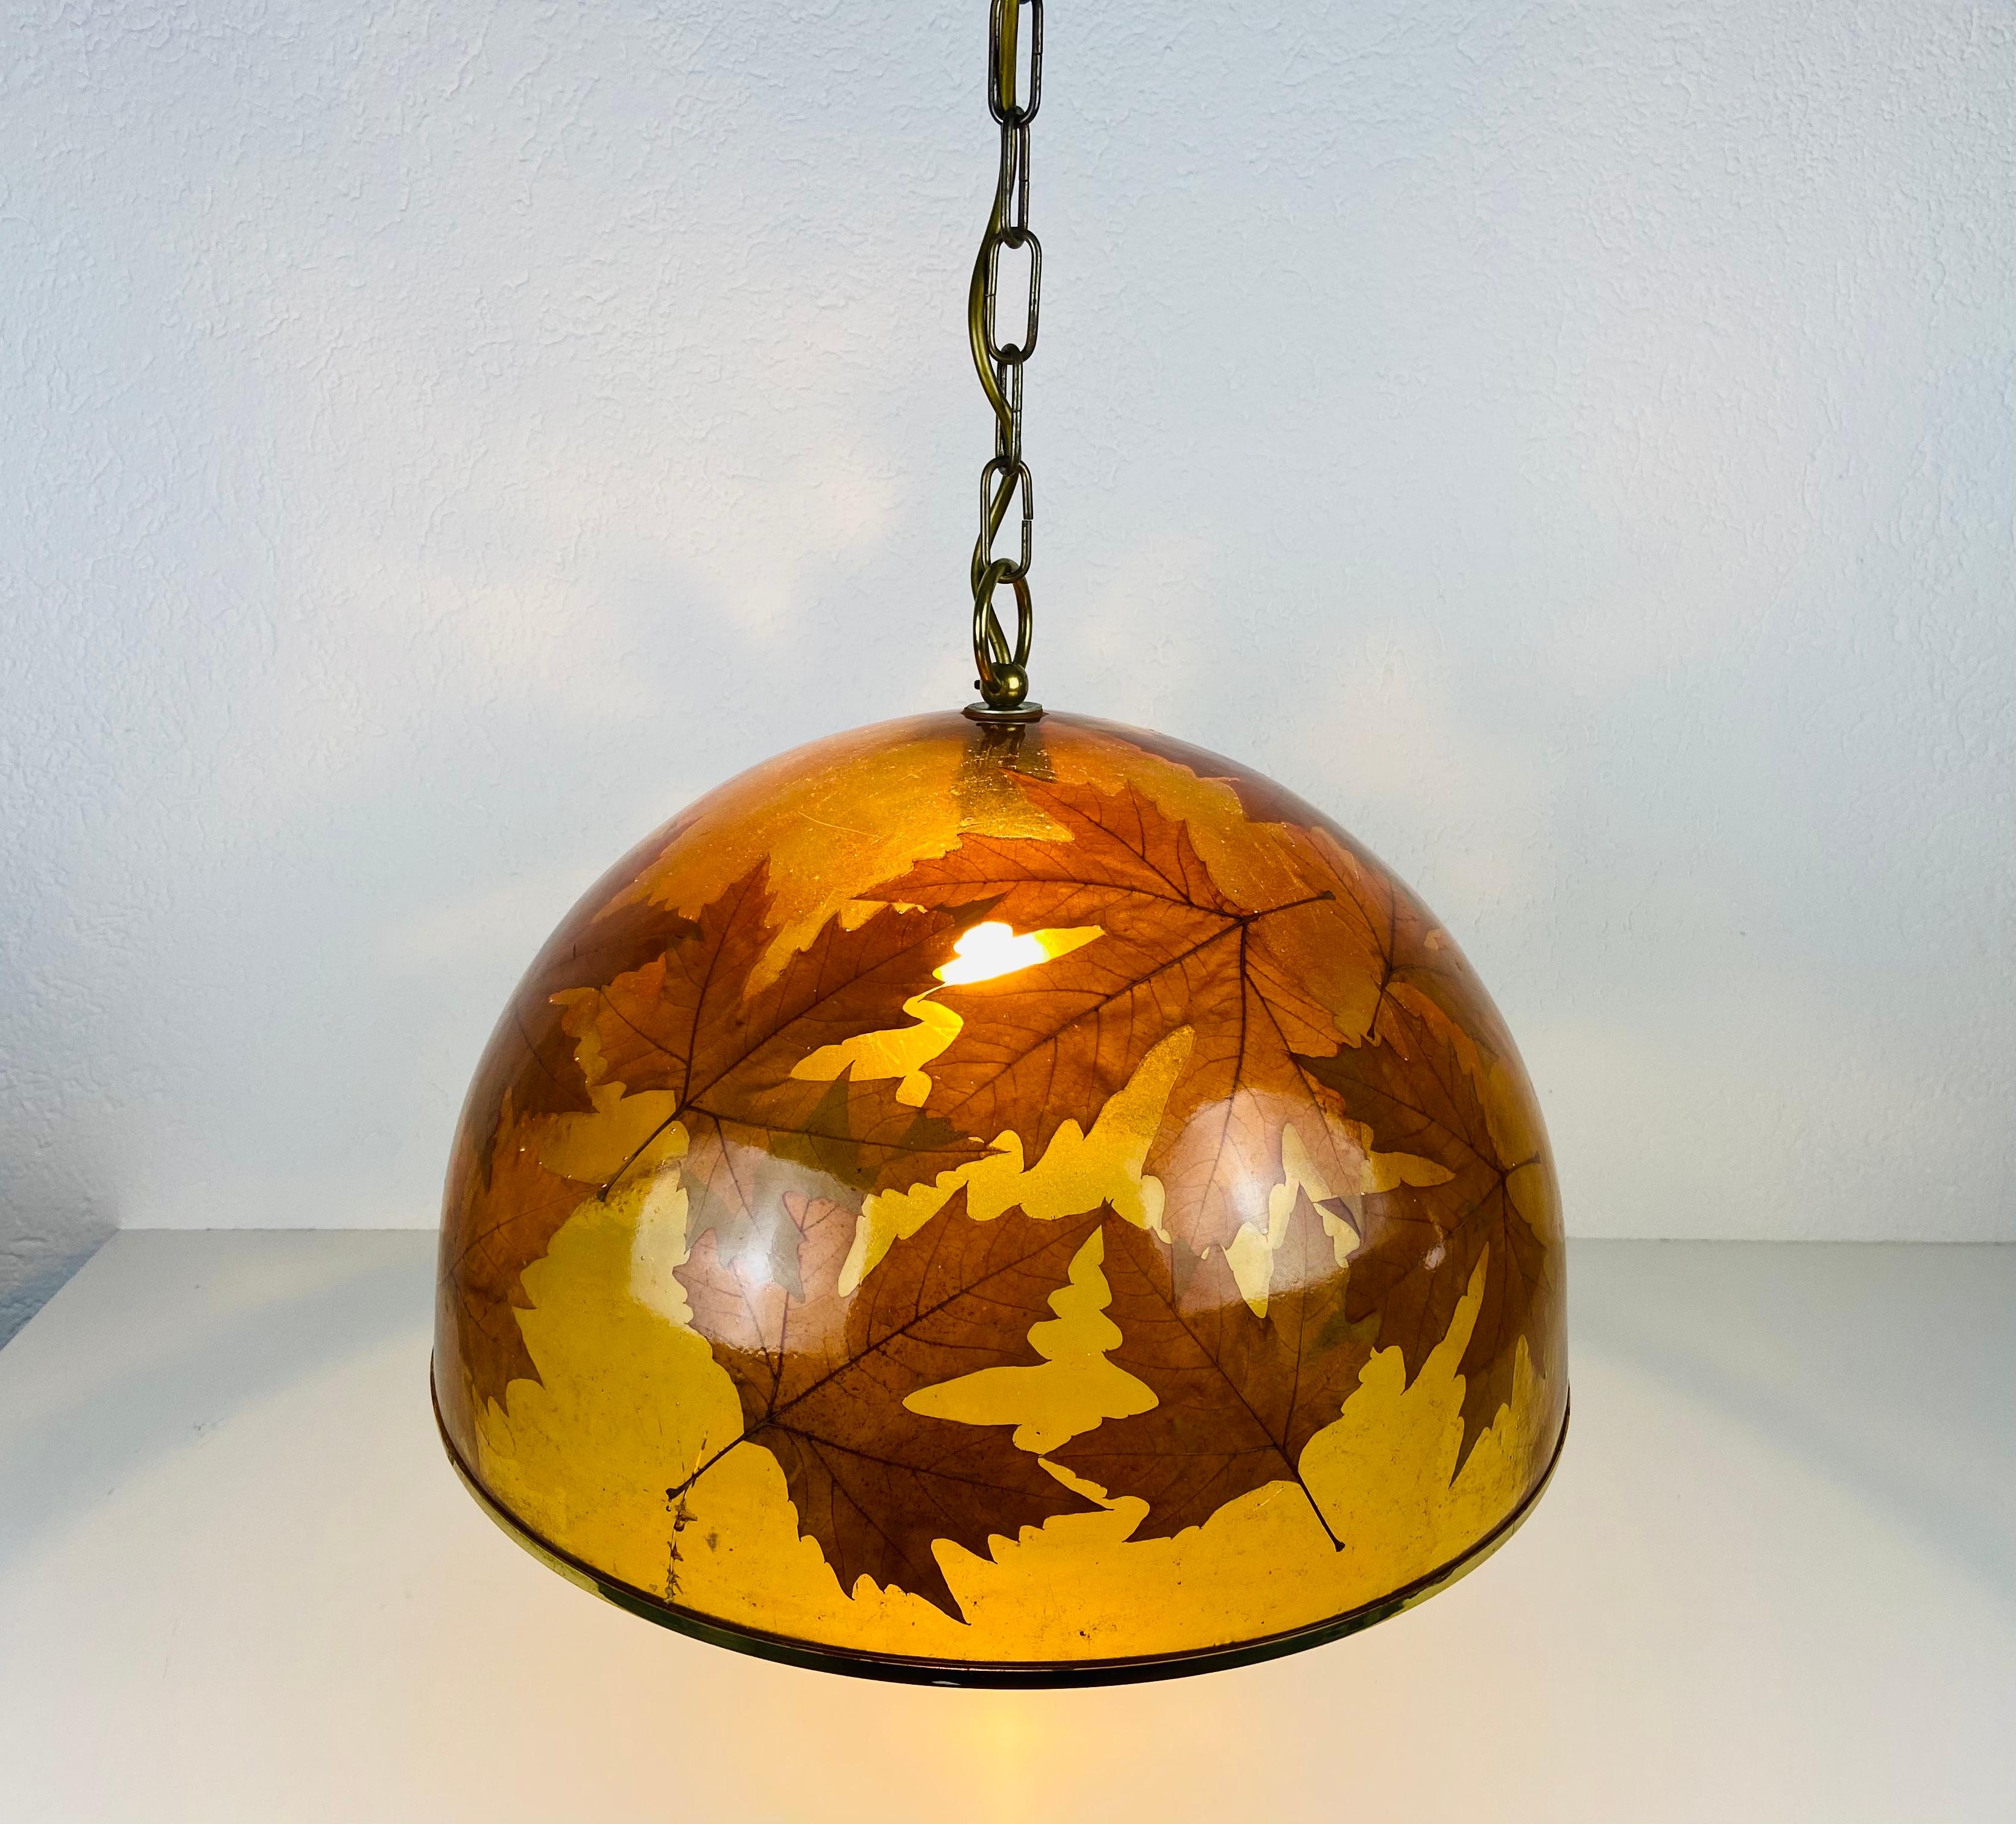 Midcentury Plexiglass Pendant Lamp with Real Leaves, Germany, 1960s For Sale 1